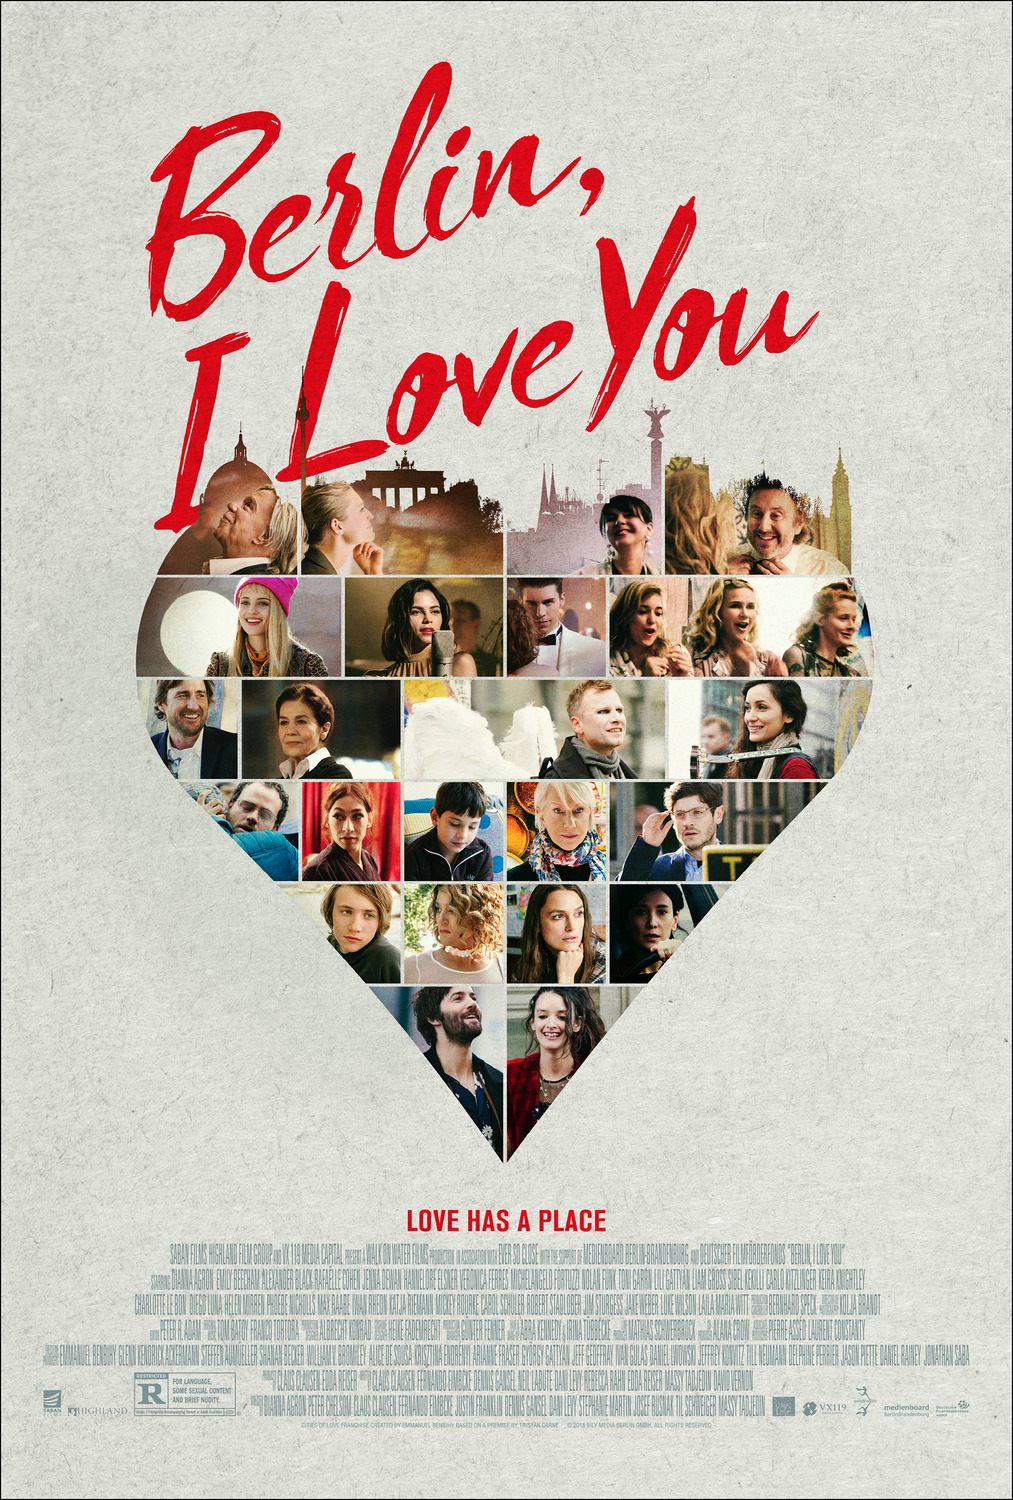 Extra Large Movie Poster Image for Berlin, I Love You 